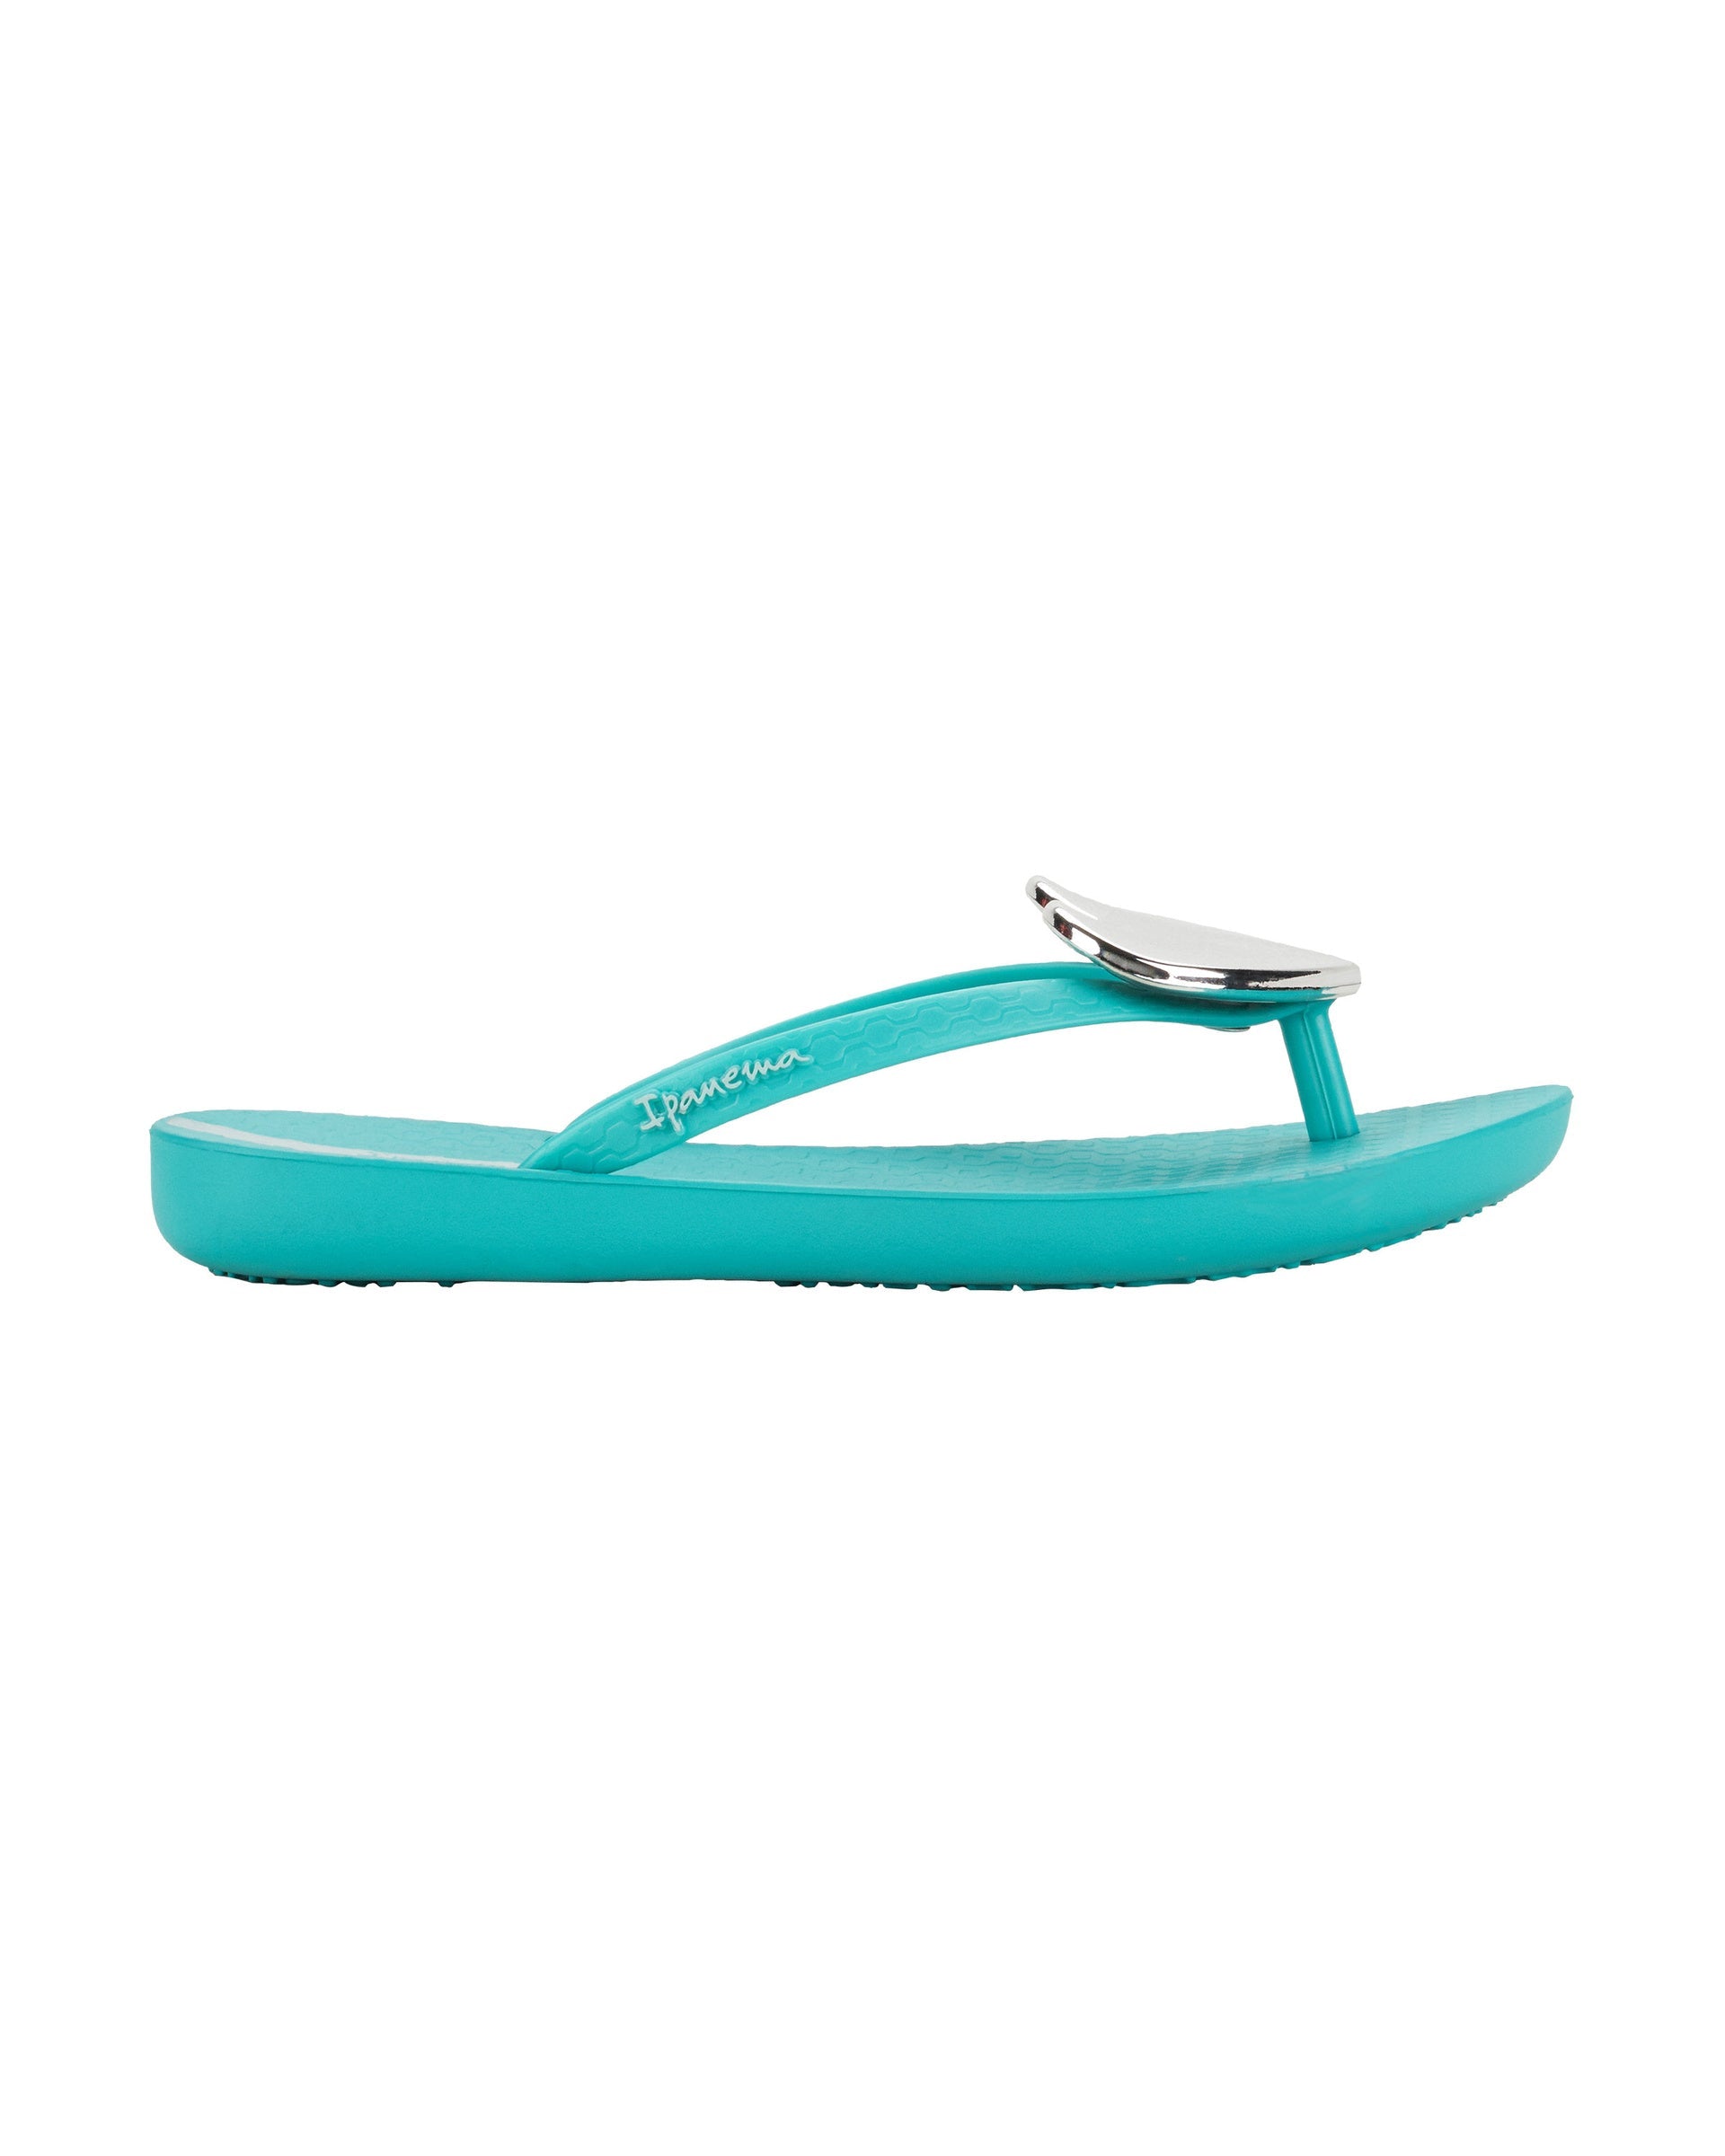 Outer side view of a blue Ipanema Wave Heart kids flip flop with silver decorative heart on the upper.